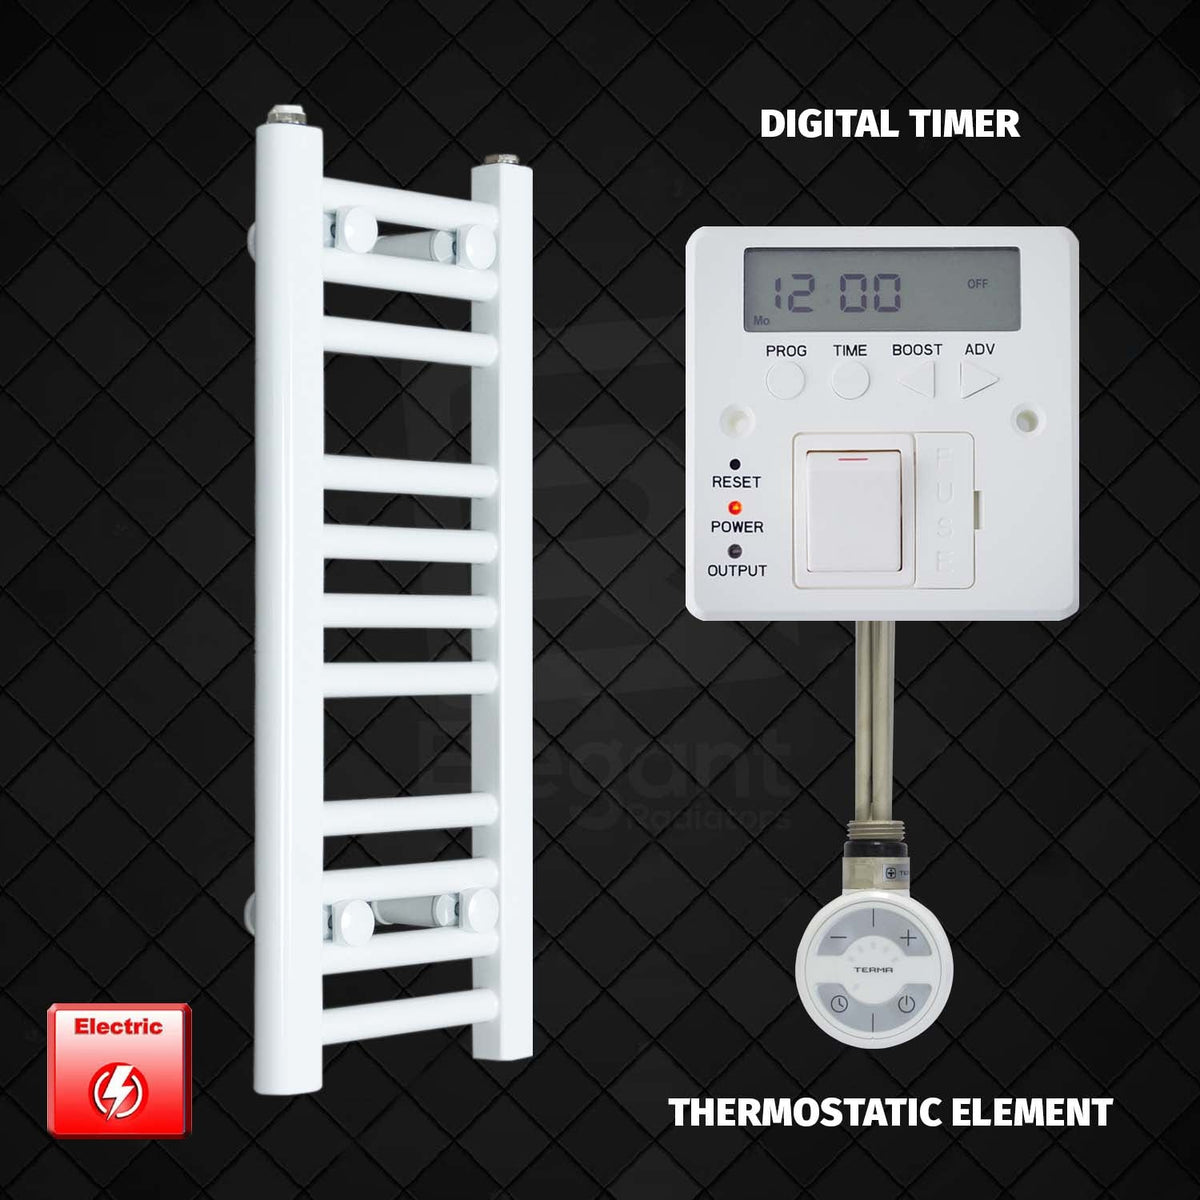 600 mm High 300 mm Wide Pre-Filled Electric Heated Towel Rail Radiator White HTR Digital Timer Thermostatic Element MOA